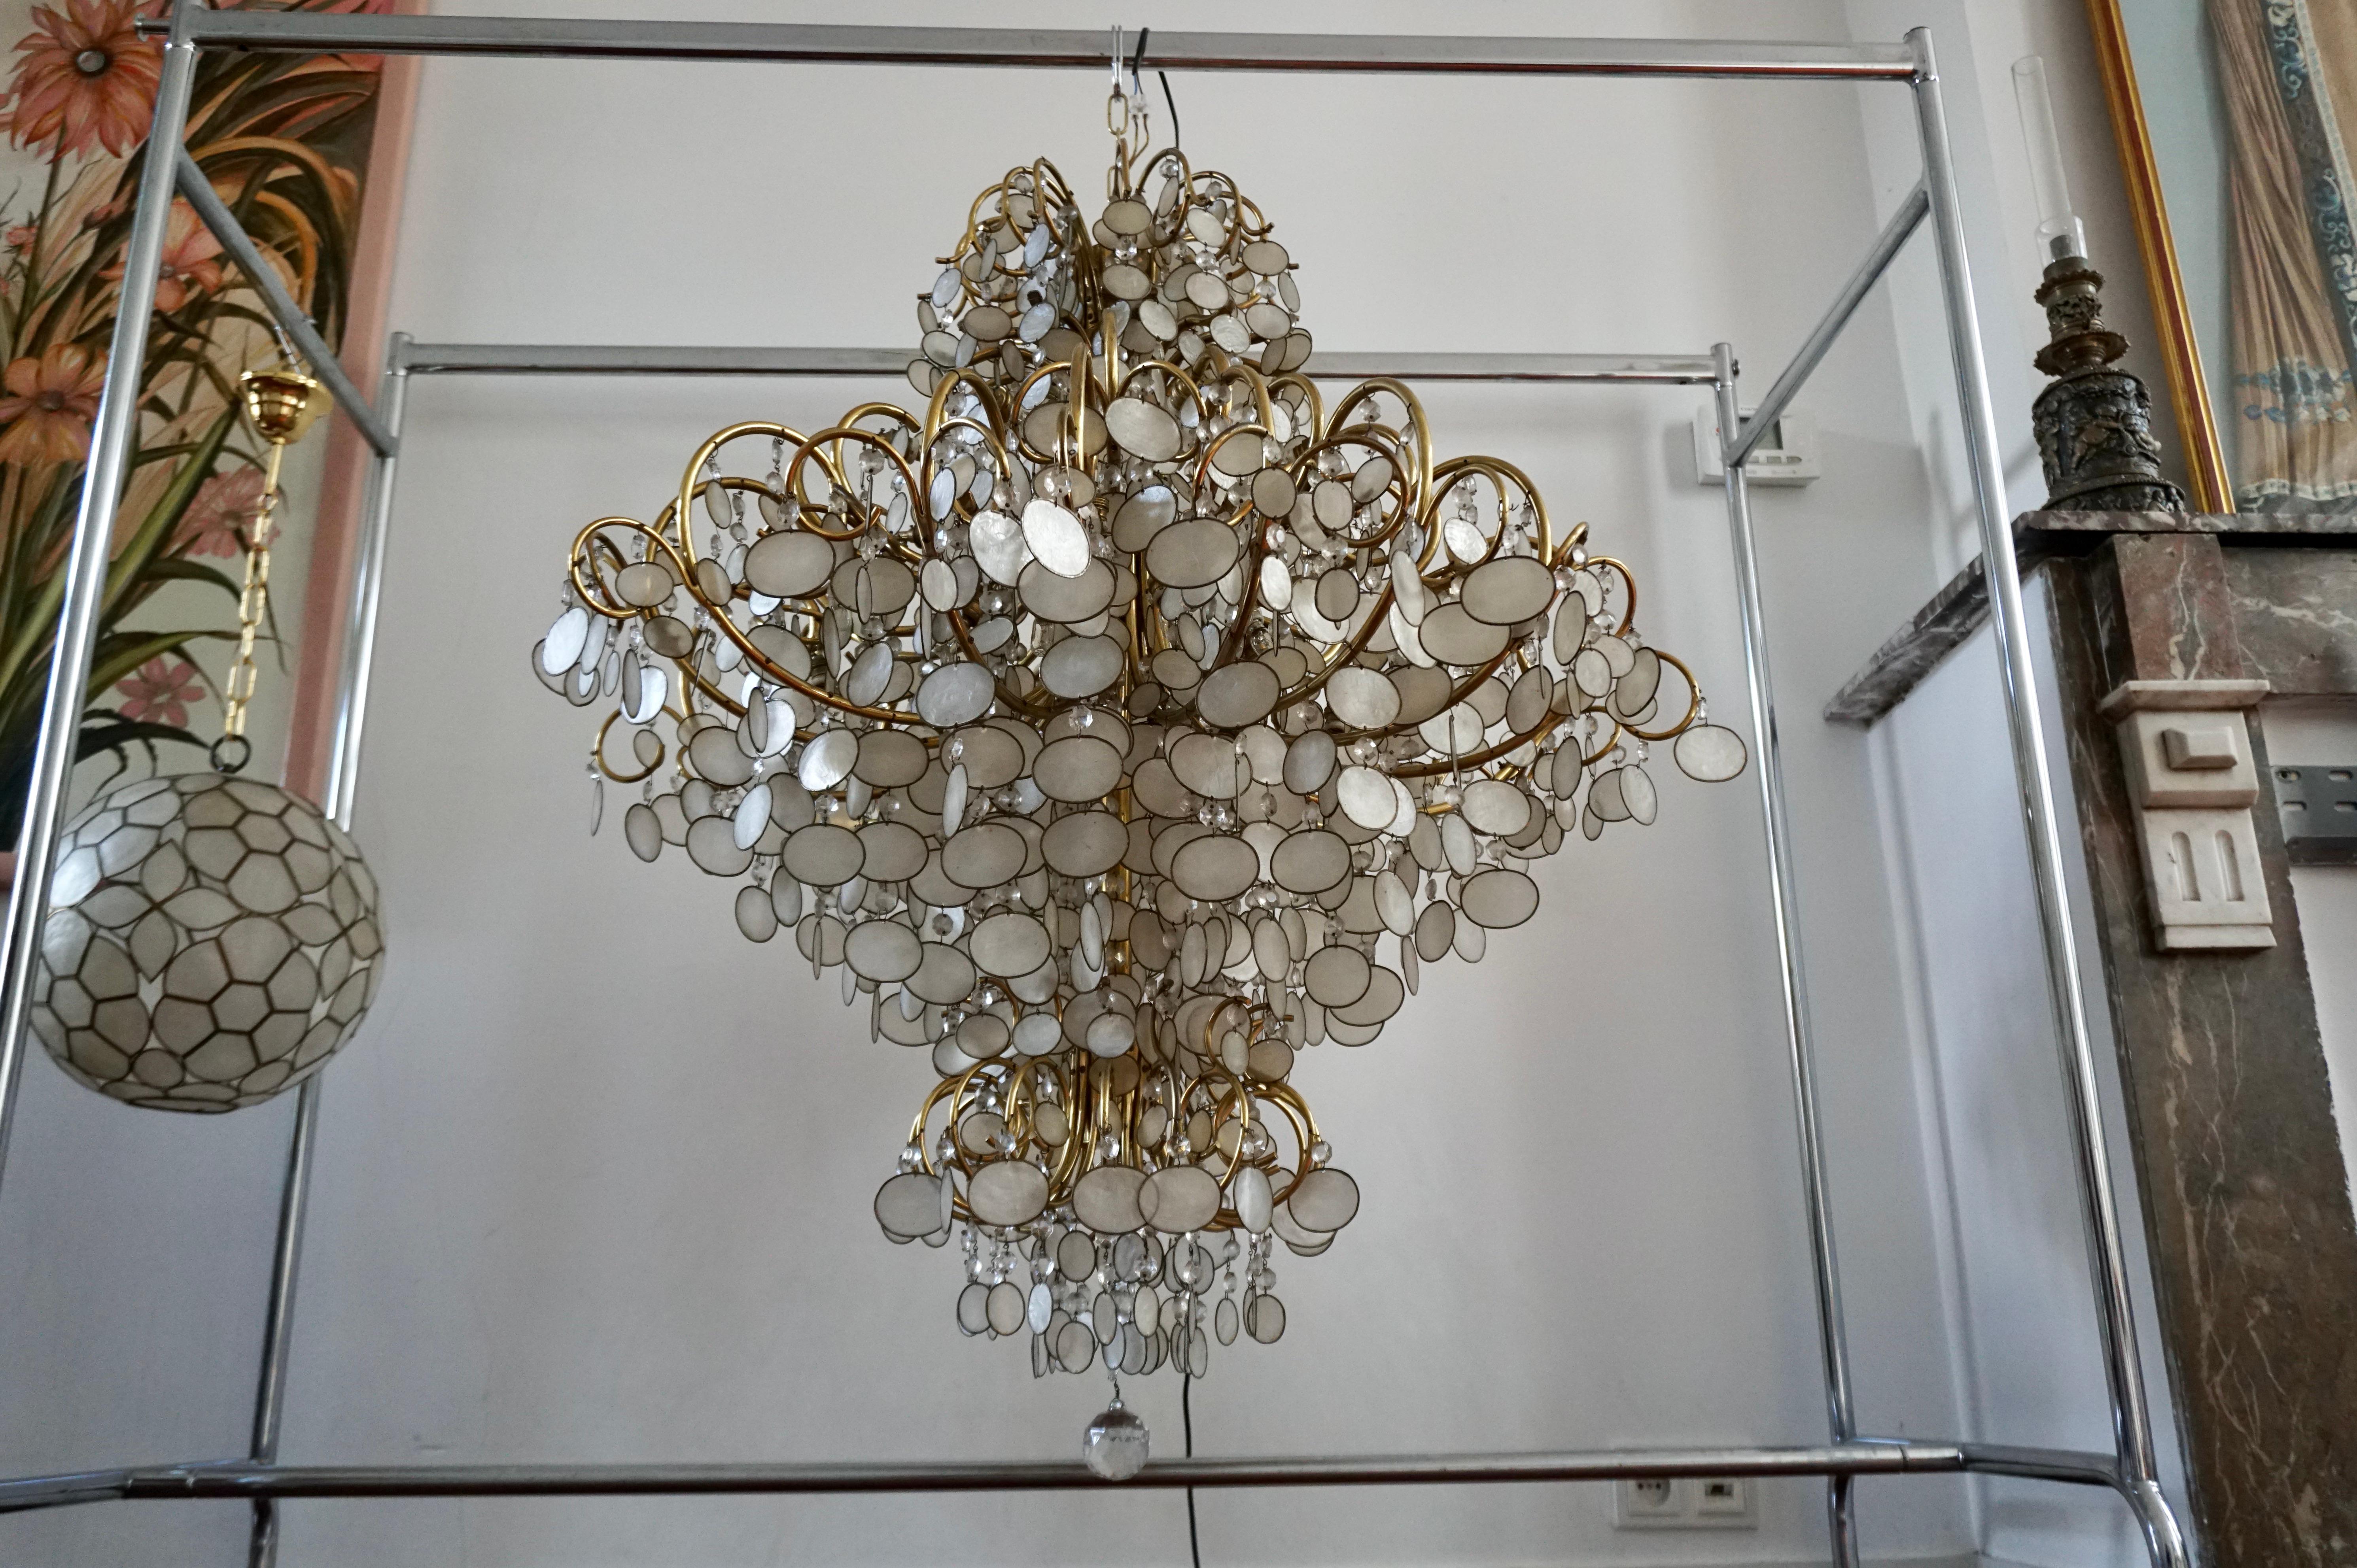 Large chandelier, Europe, 1950s, 1970s.

Large circular 90 cm/36 inch chandelier with many layers of capiz shells.The frame is made of brass and holds numerous round capiz shells in brass rings.Due to the combination of the brass and the big amount